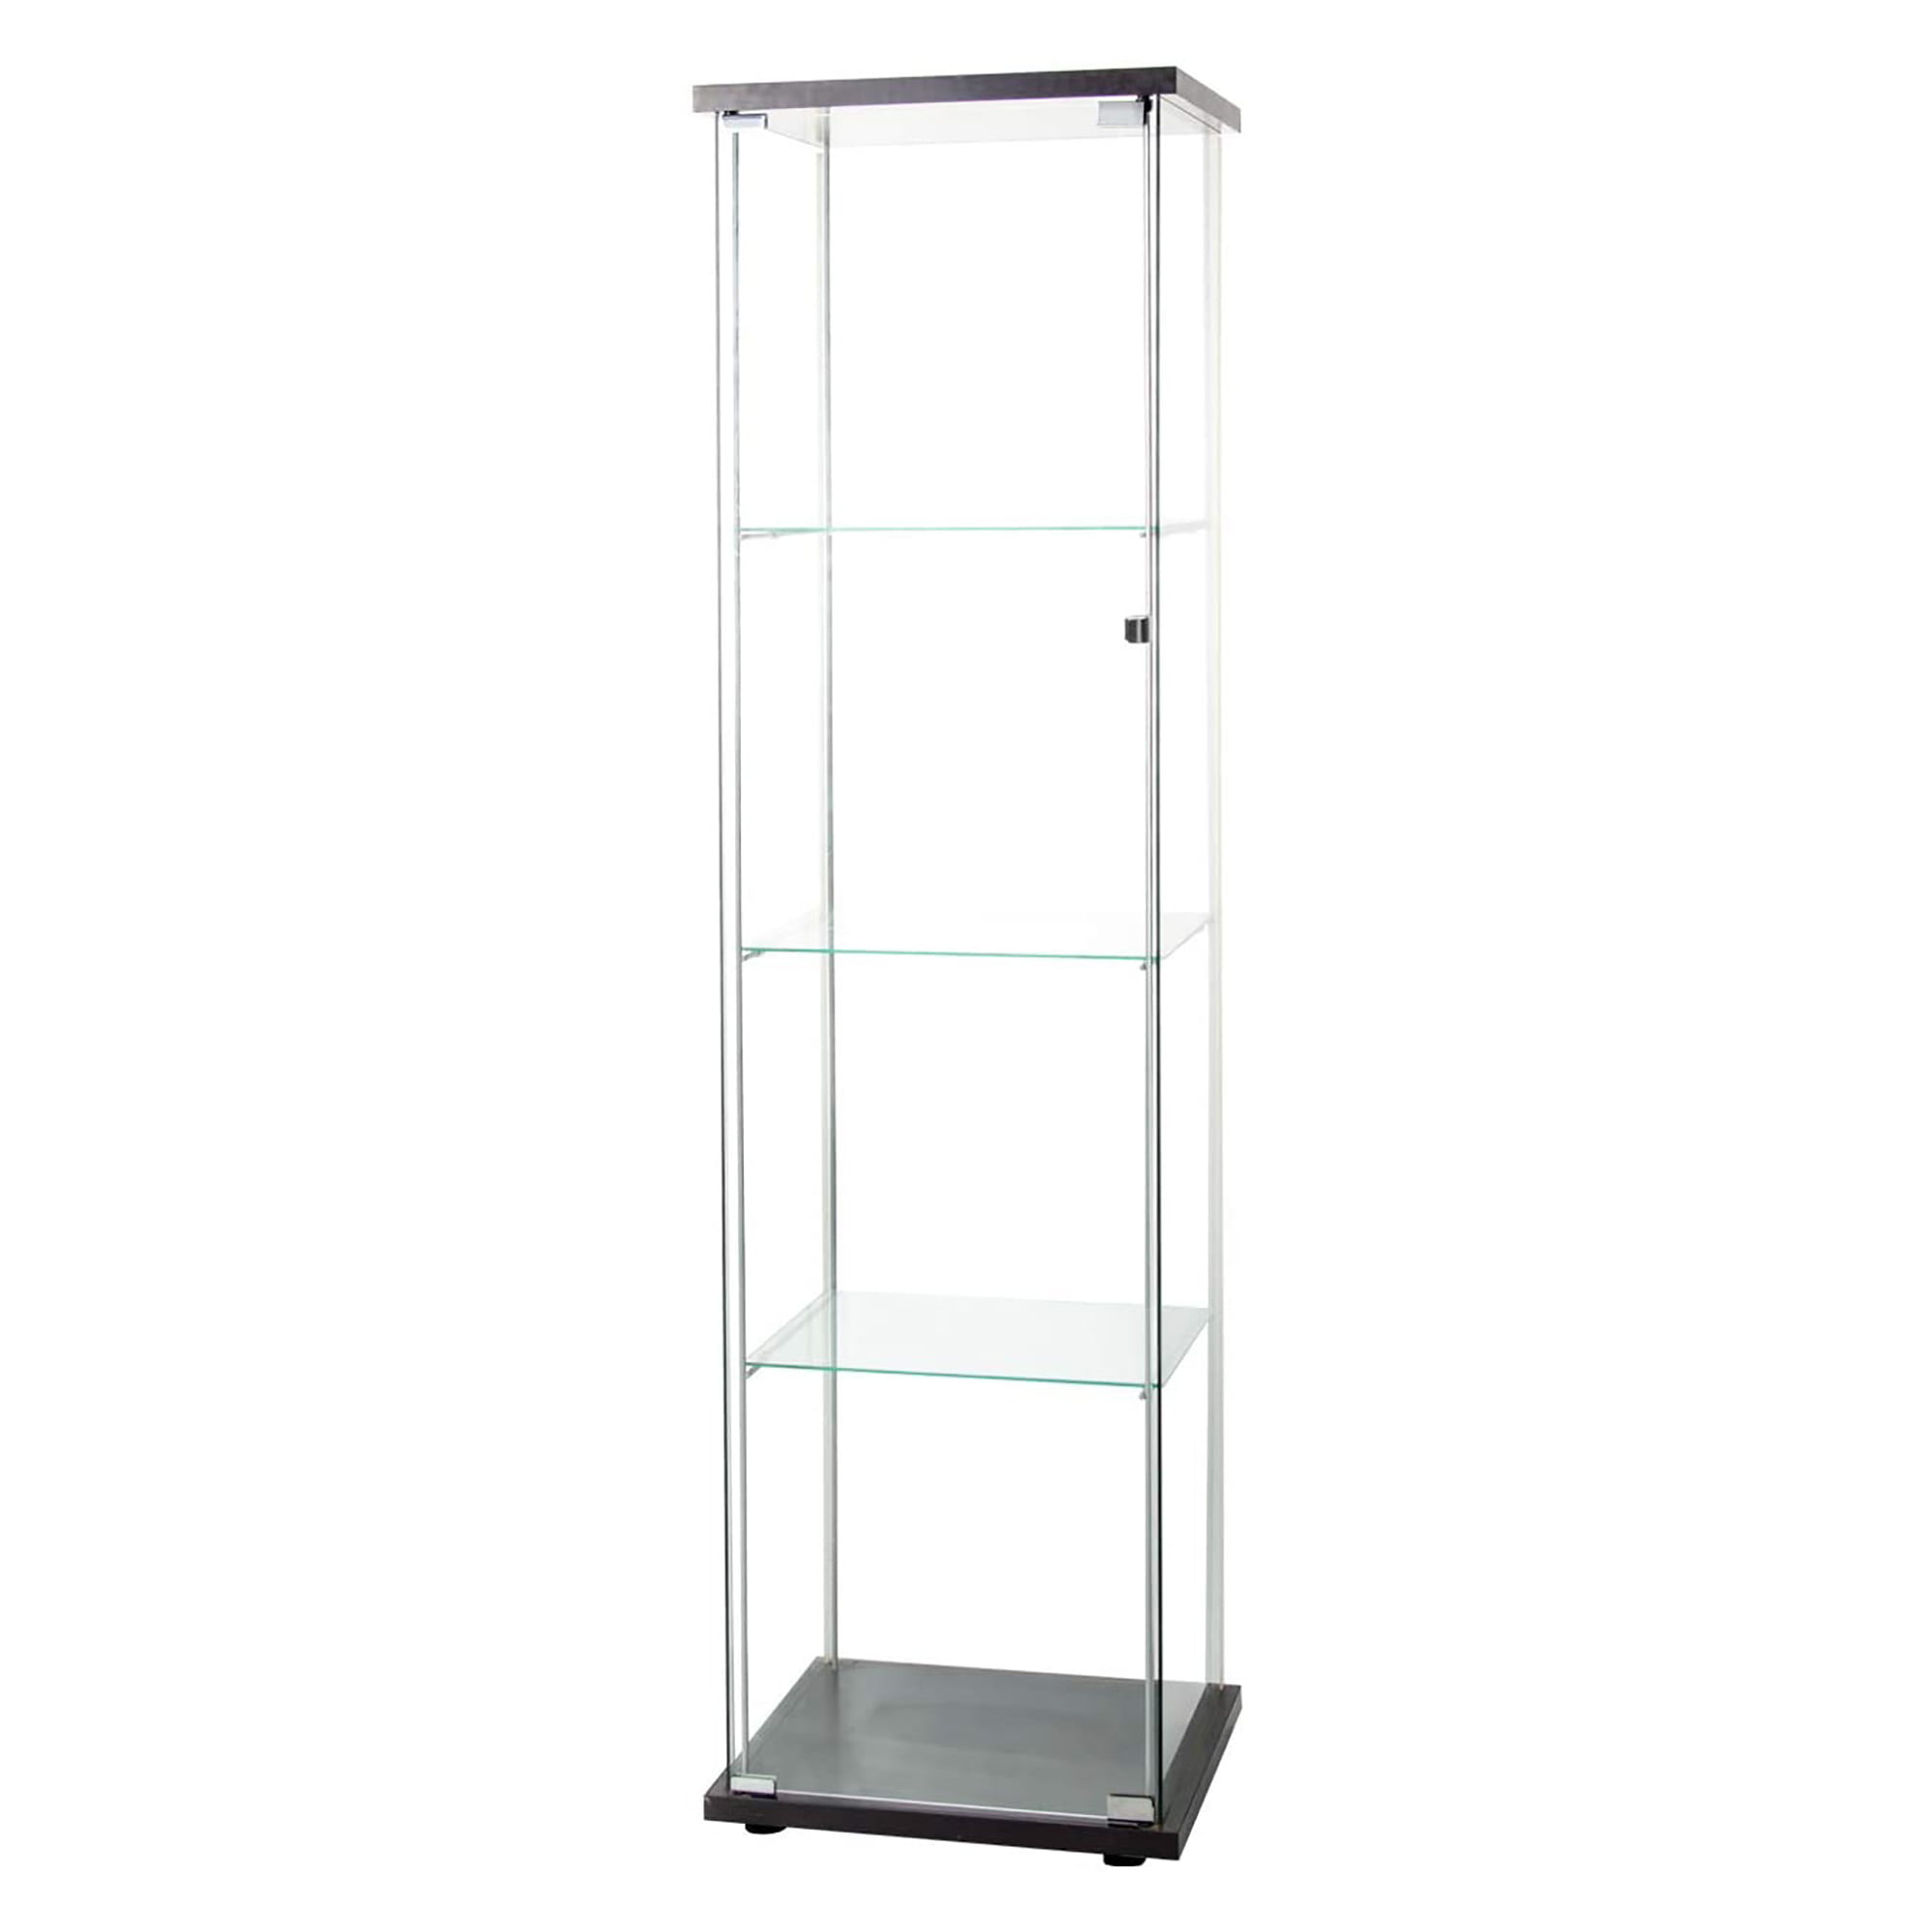 2 x Shelves B&Q For HOME Glass Display Cabinet Pack W462 x D 247 x H6mm 